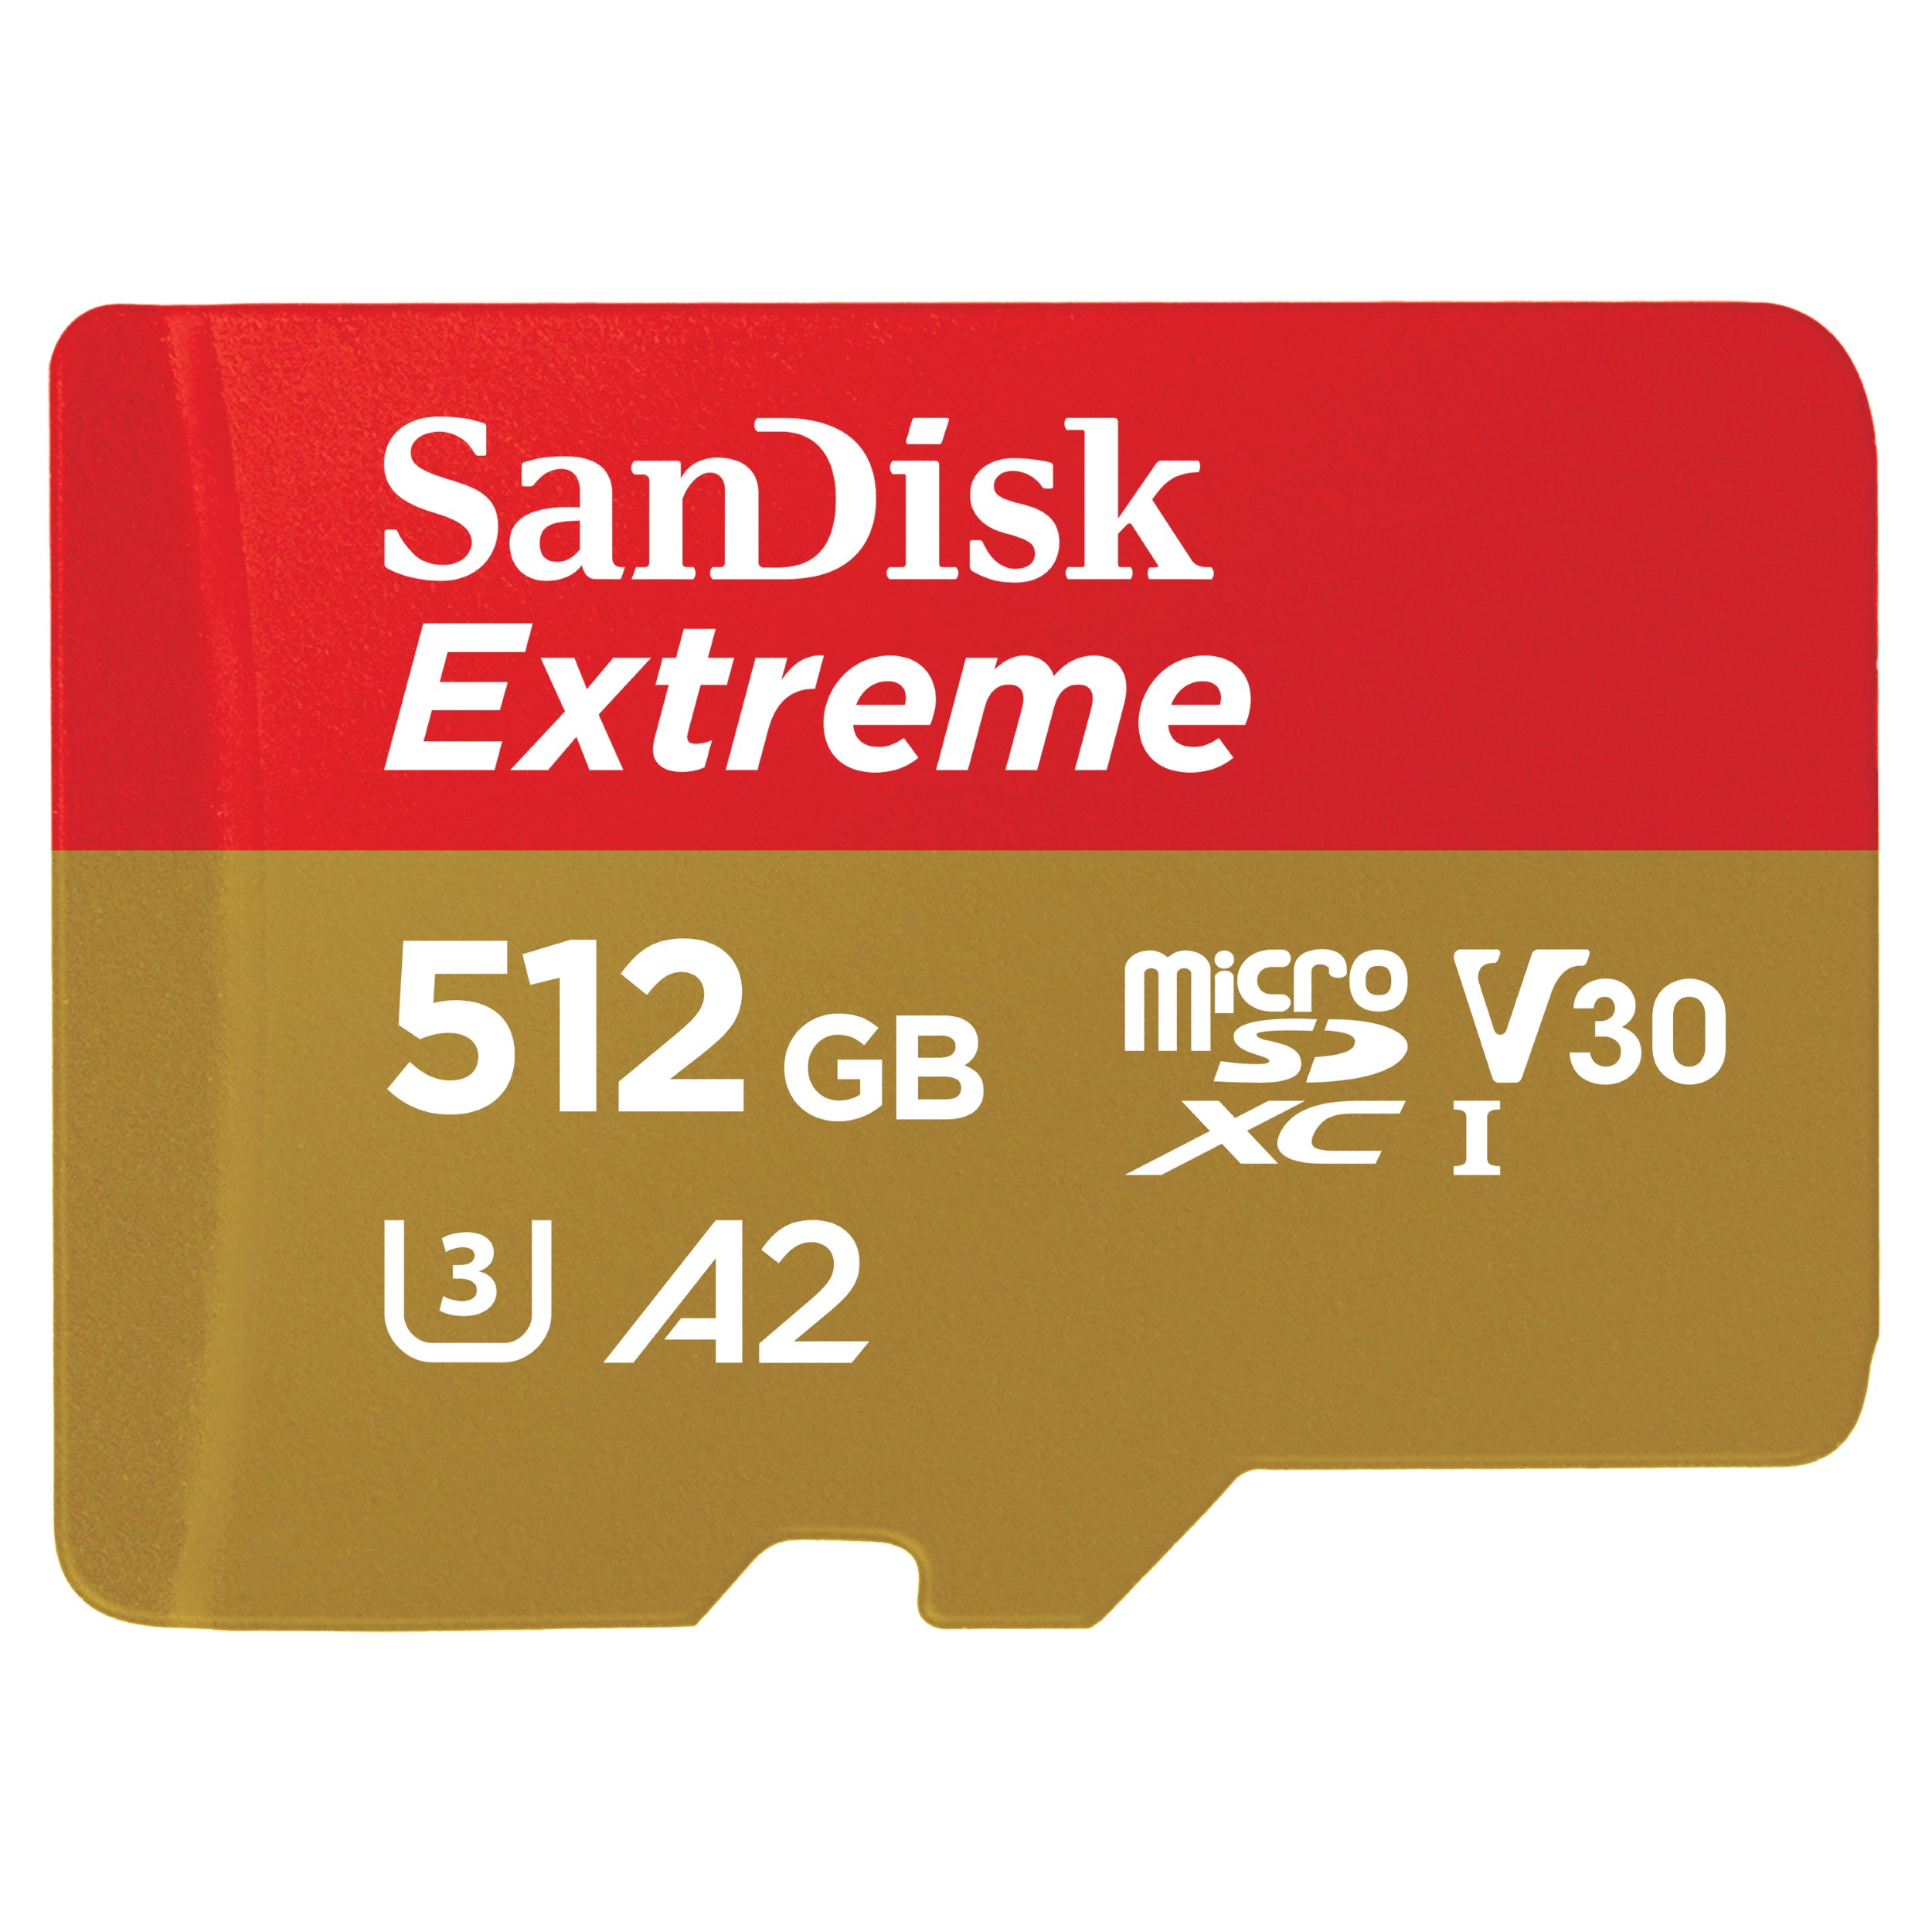 Picture of SanDisk Extreme MicroSD Card 5126GB